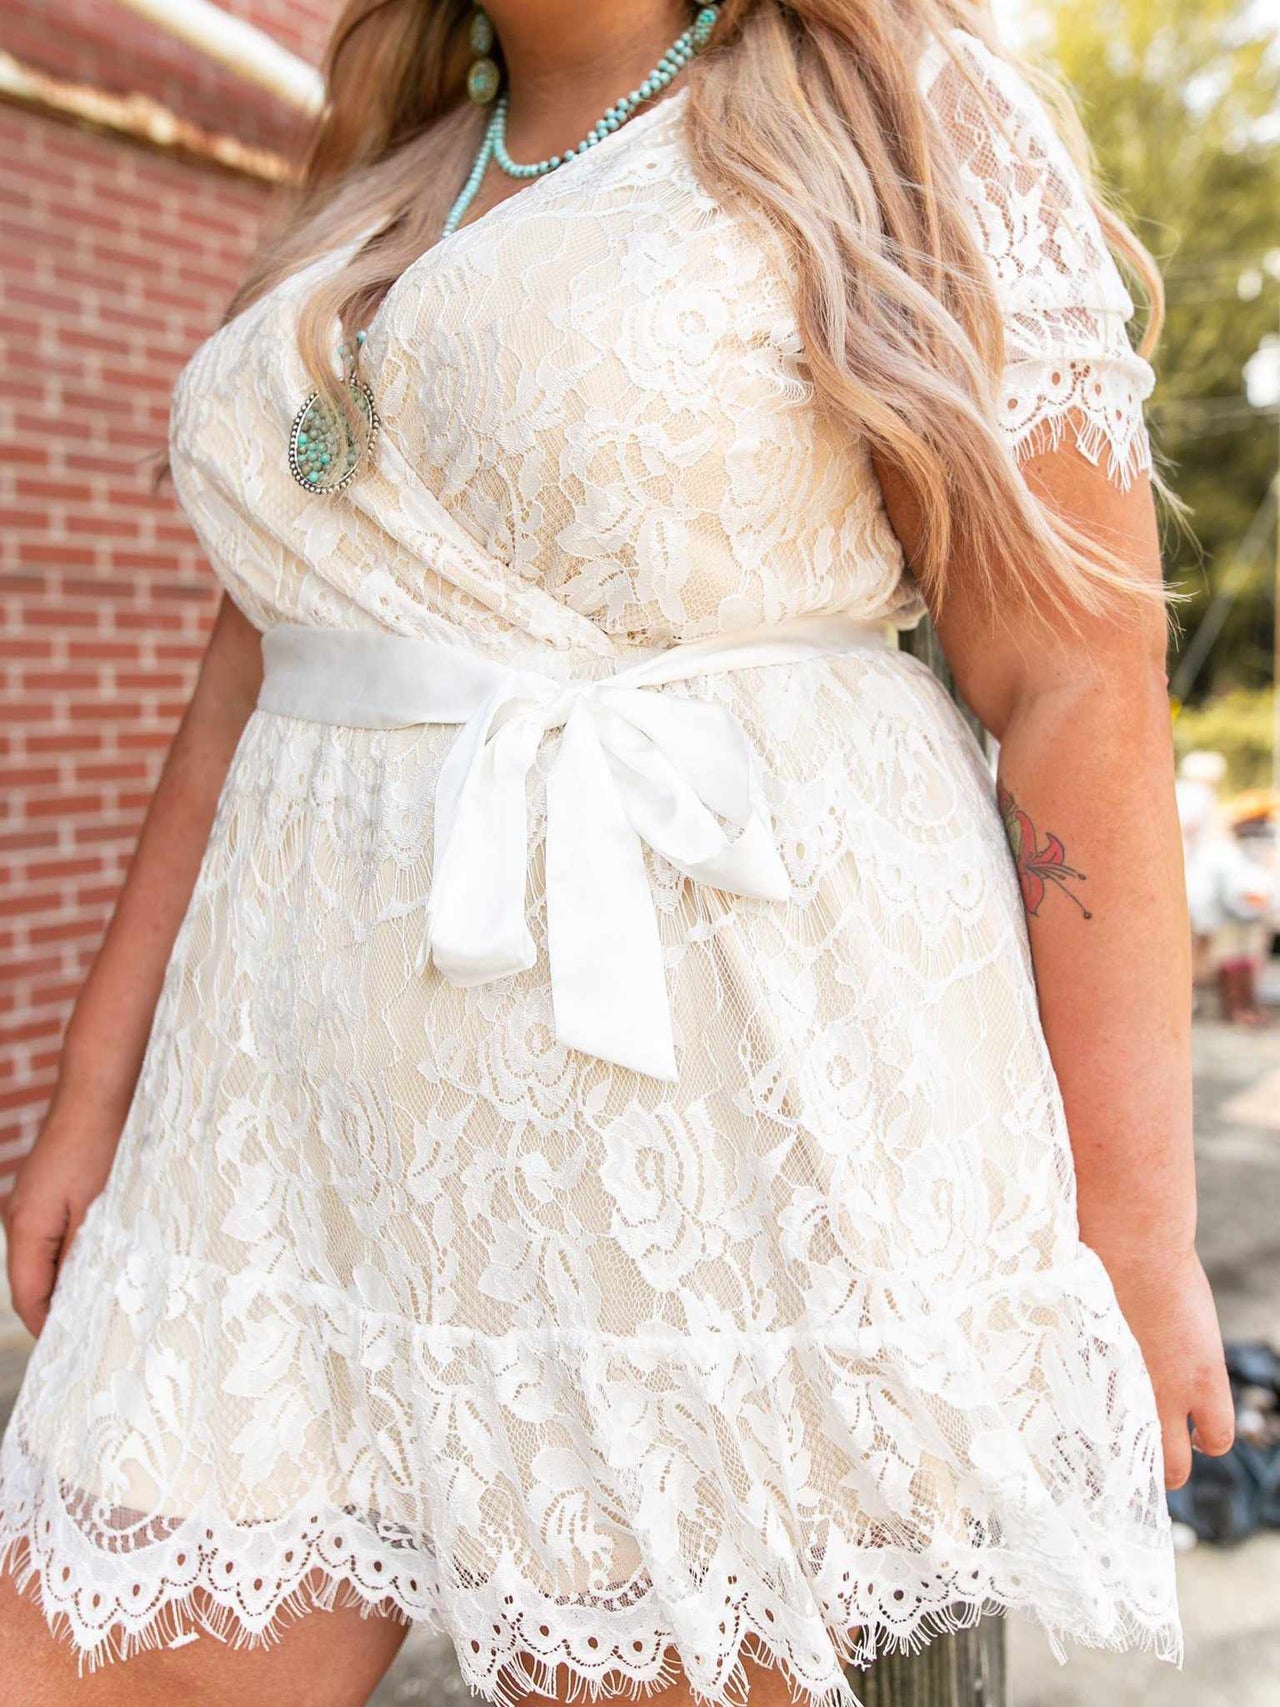 Wrapped Up In Your Arms Lace Dress-Dresses-Southern Fried Chics